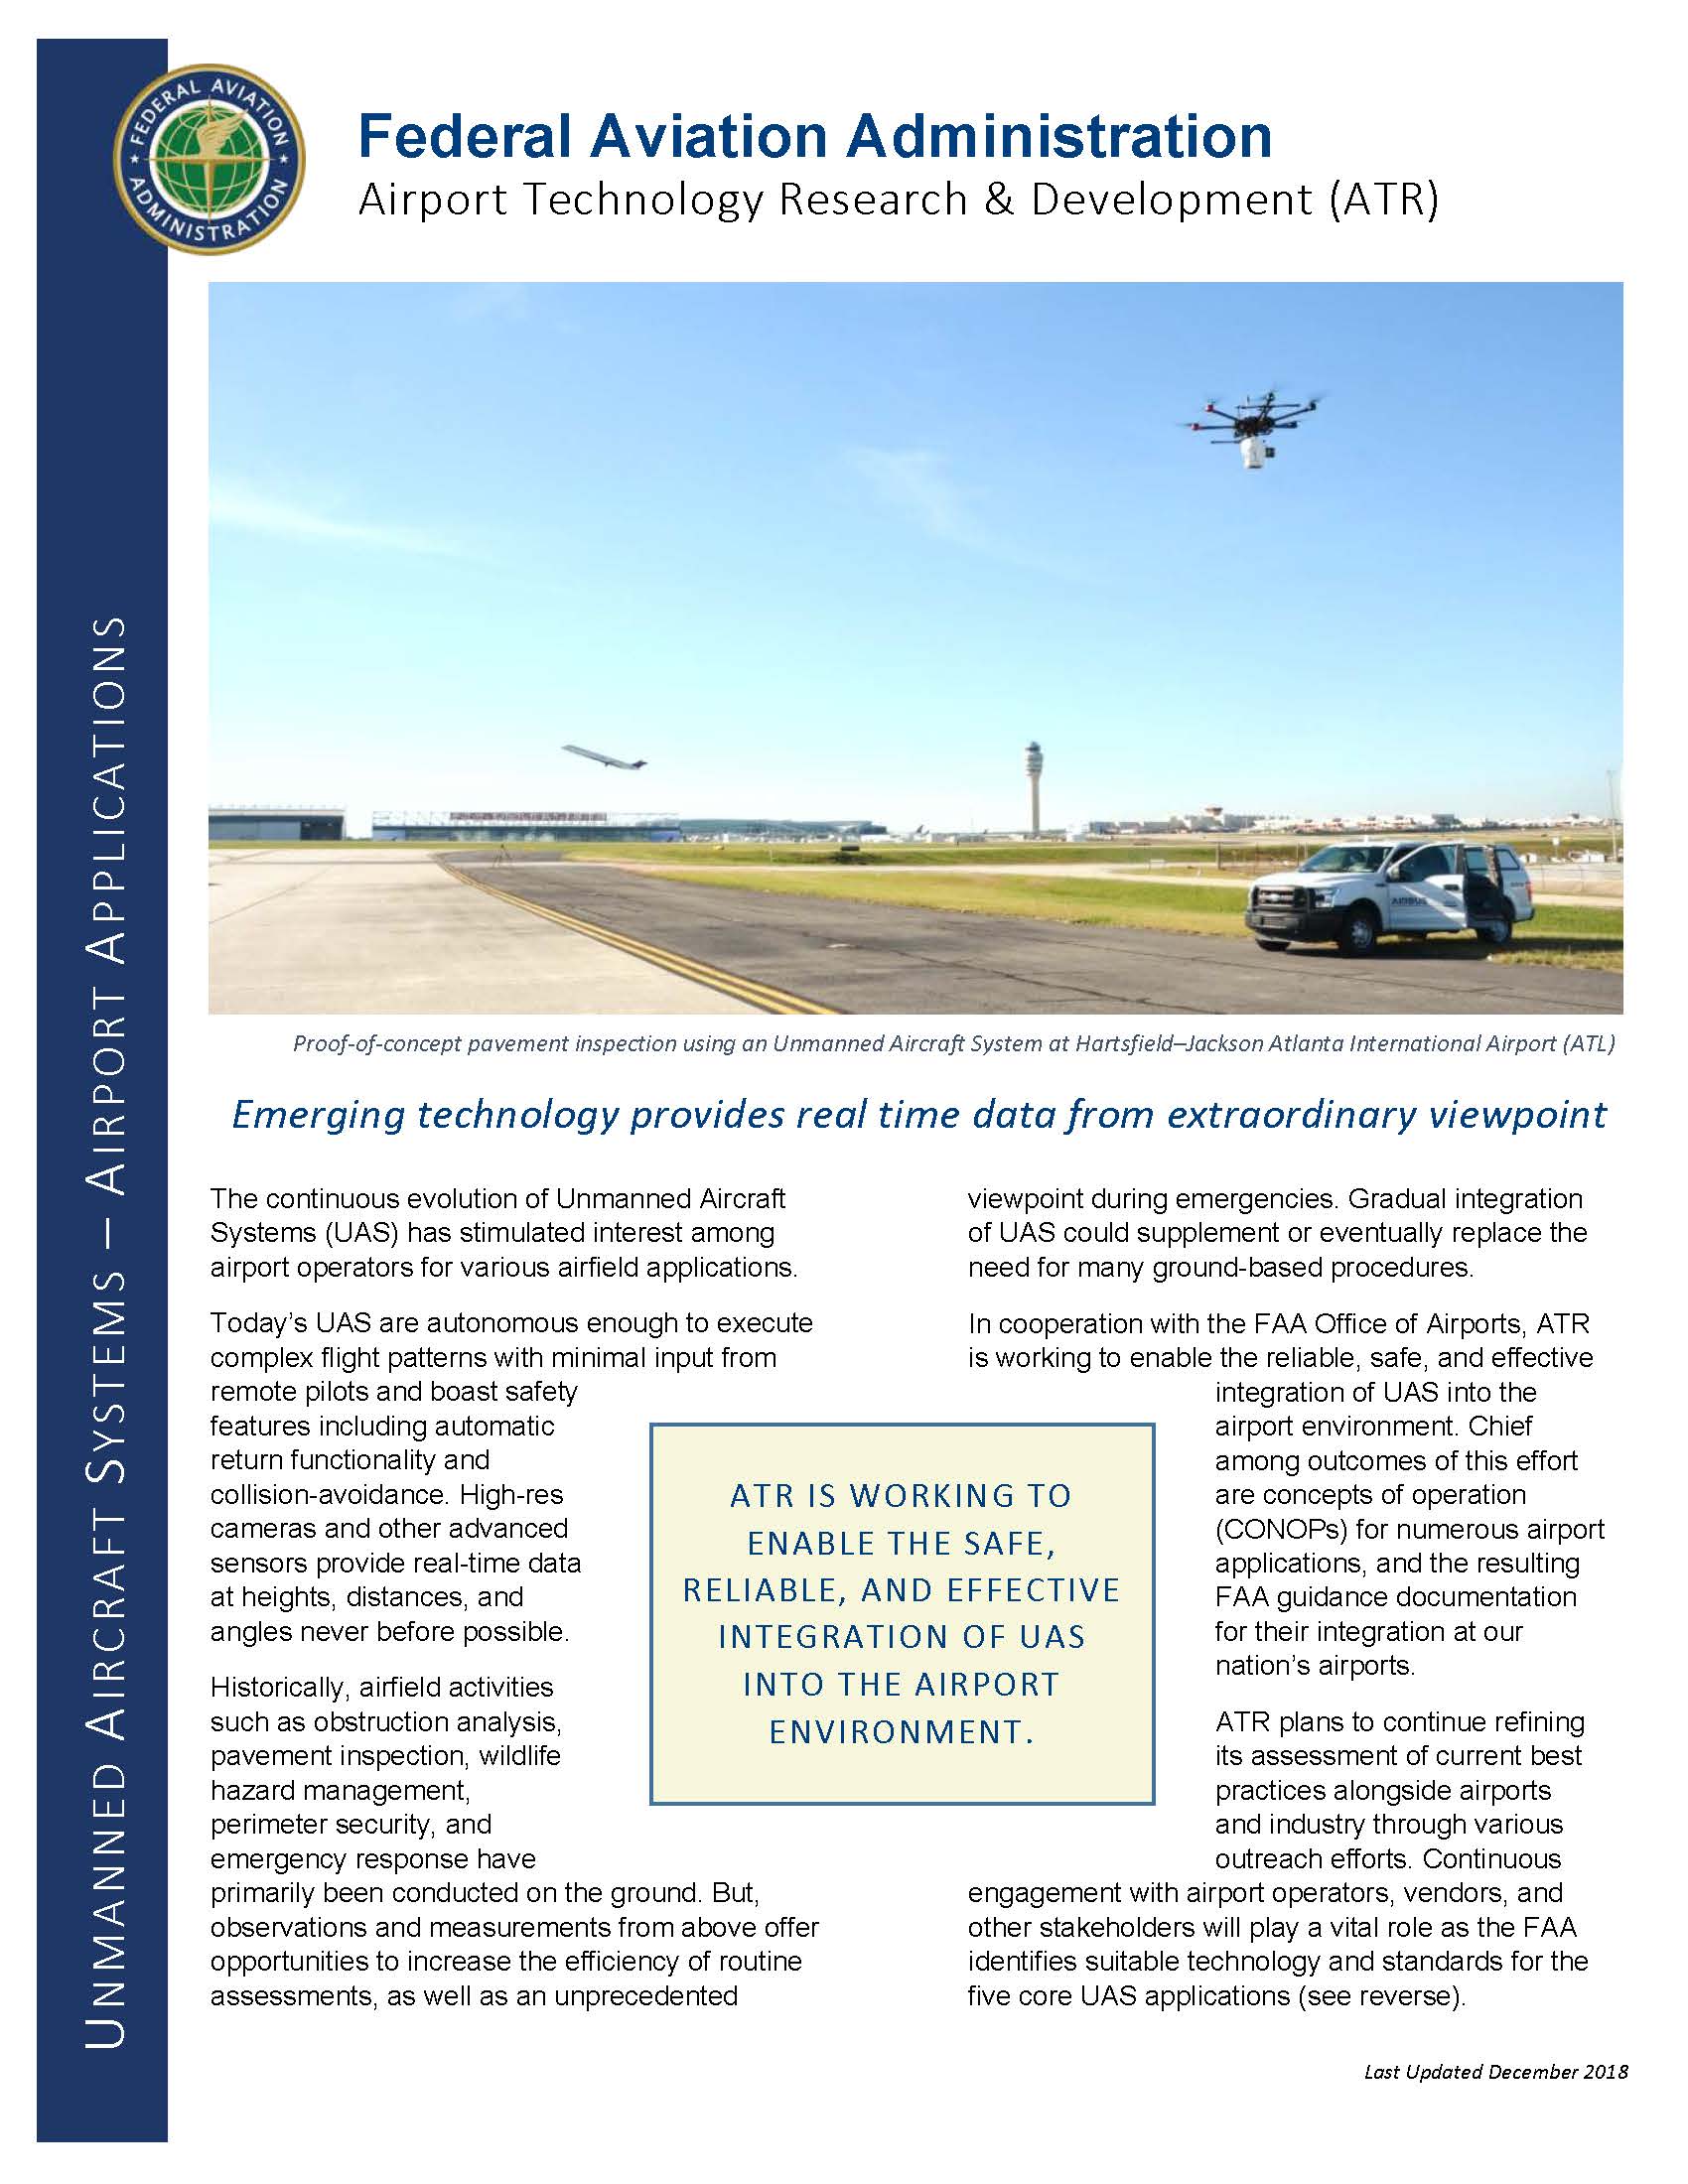 Unmanned Aircraft Systems Airport Applications